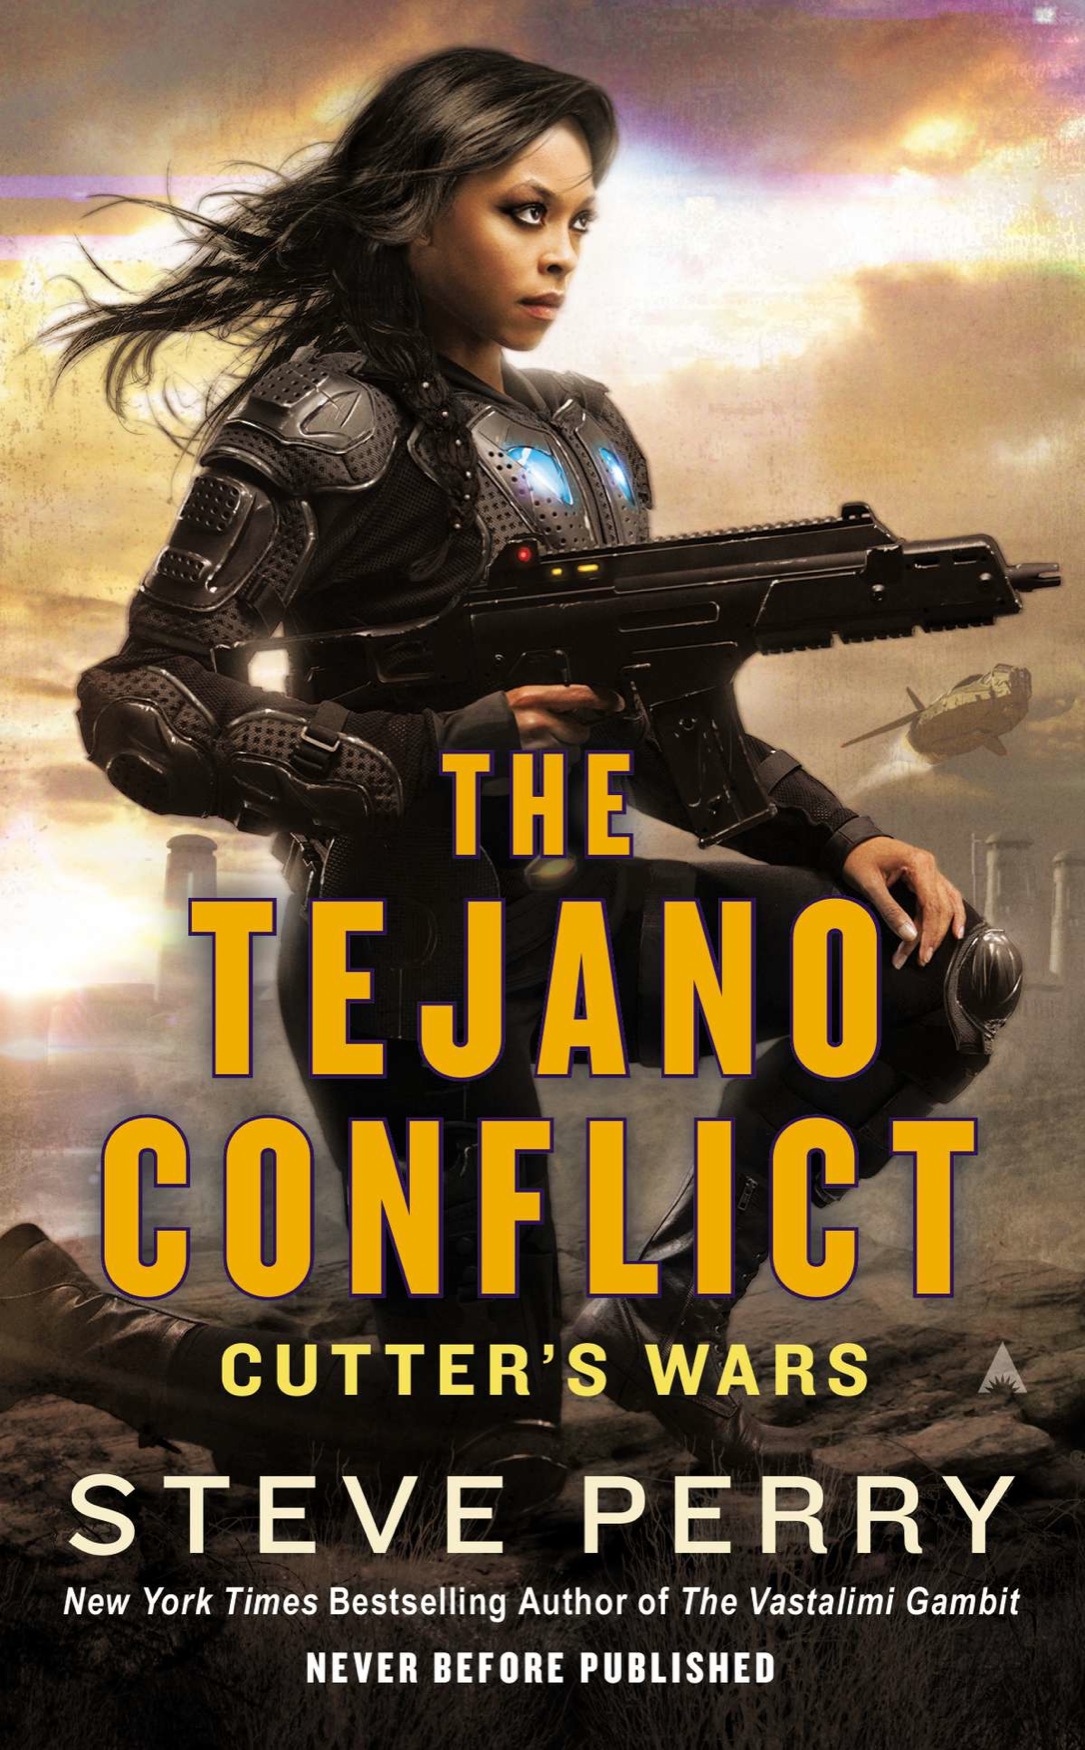 The Tejano Conflict (2014) by Steve Perry